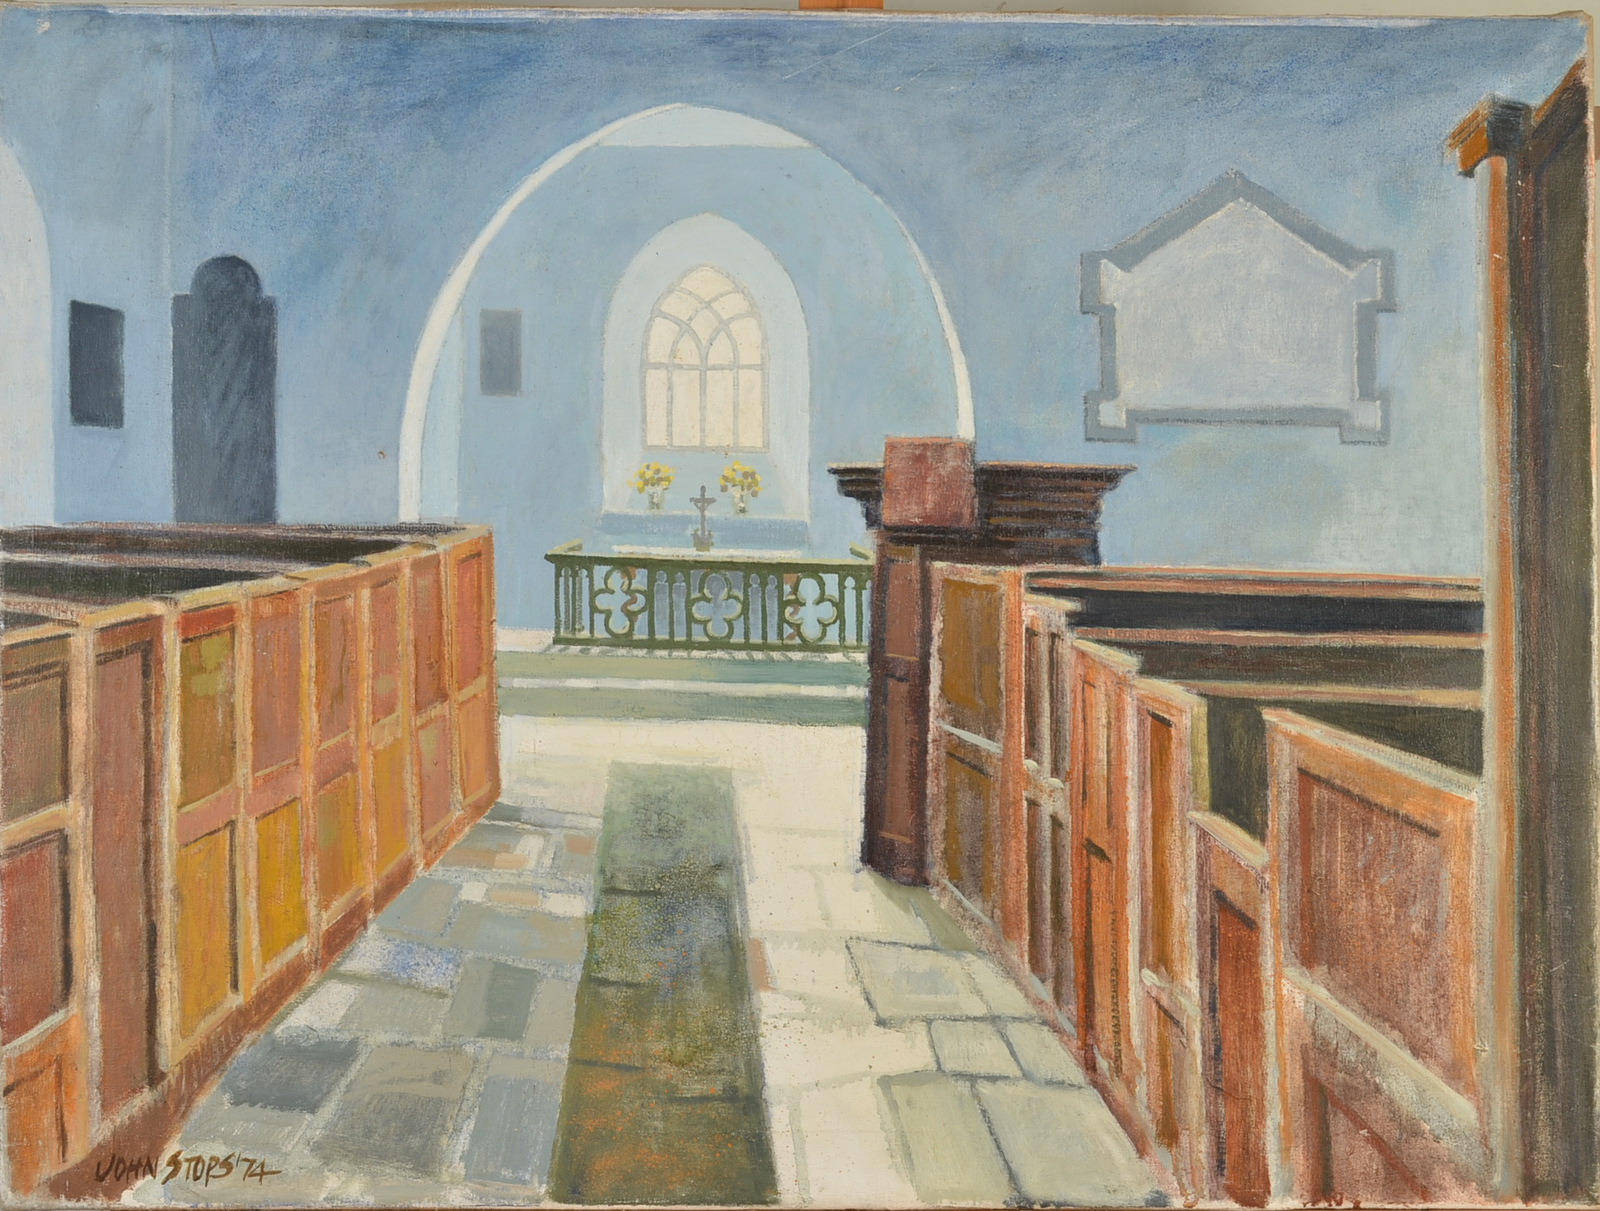 JOHN STOPS
Church Interior
Oil on canvas
Signed and dated '74
76 x 101cm